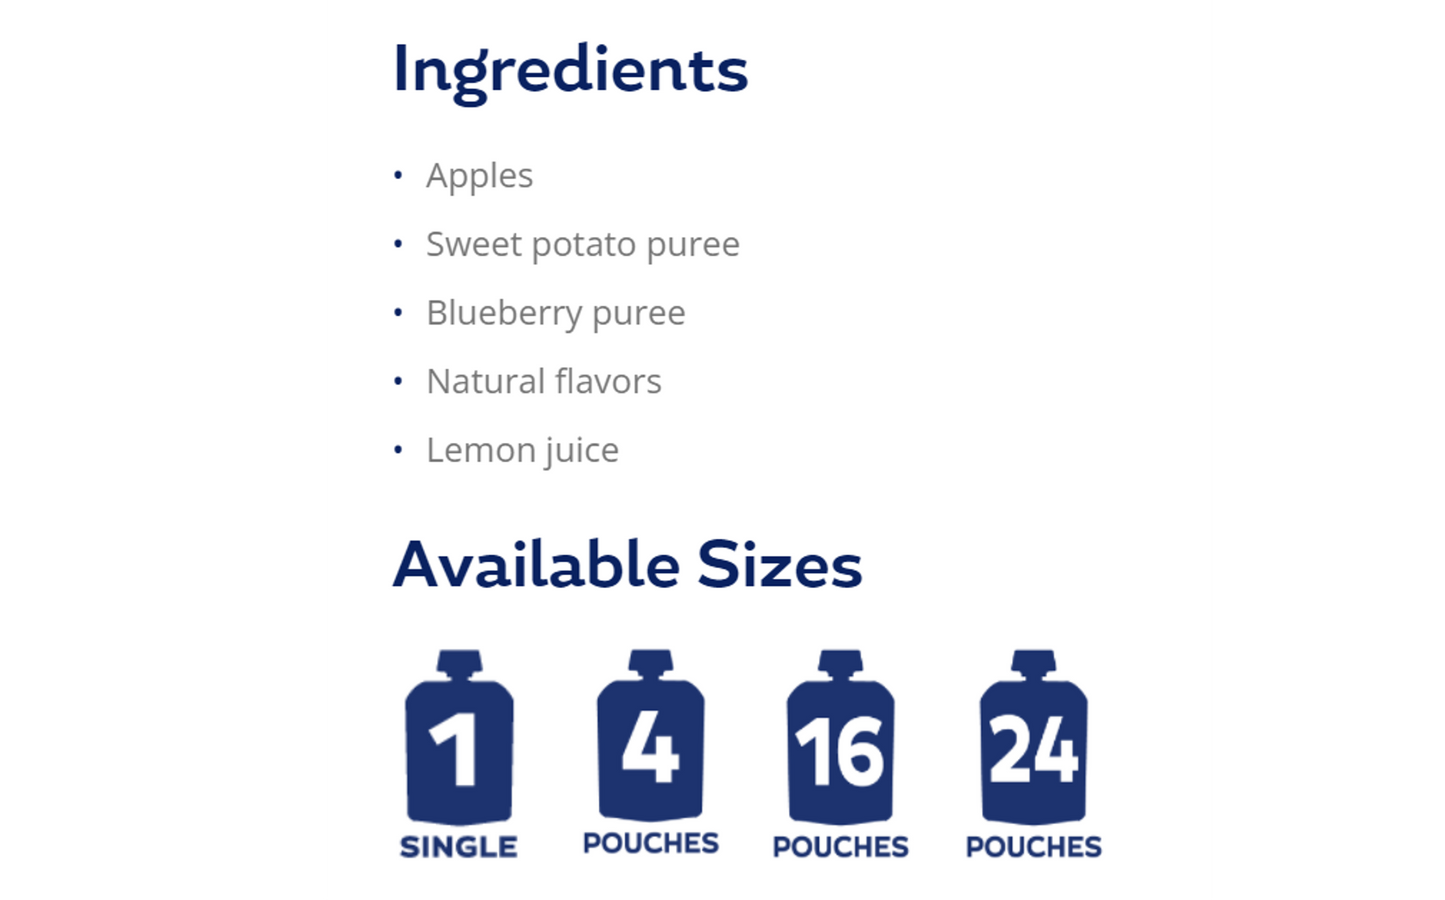 Simple ingredients and available sizes of Buddy Fruits Blueberry, Sweet Potato & Apple fruit & veggies pouch.